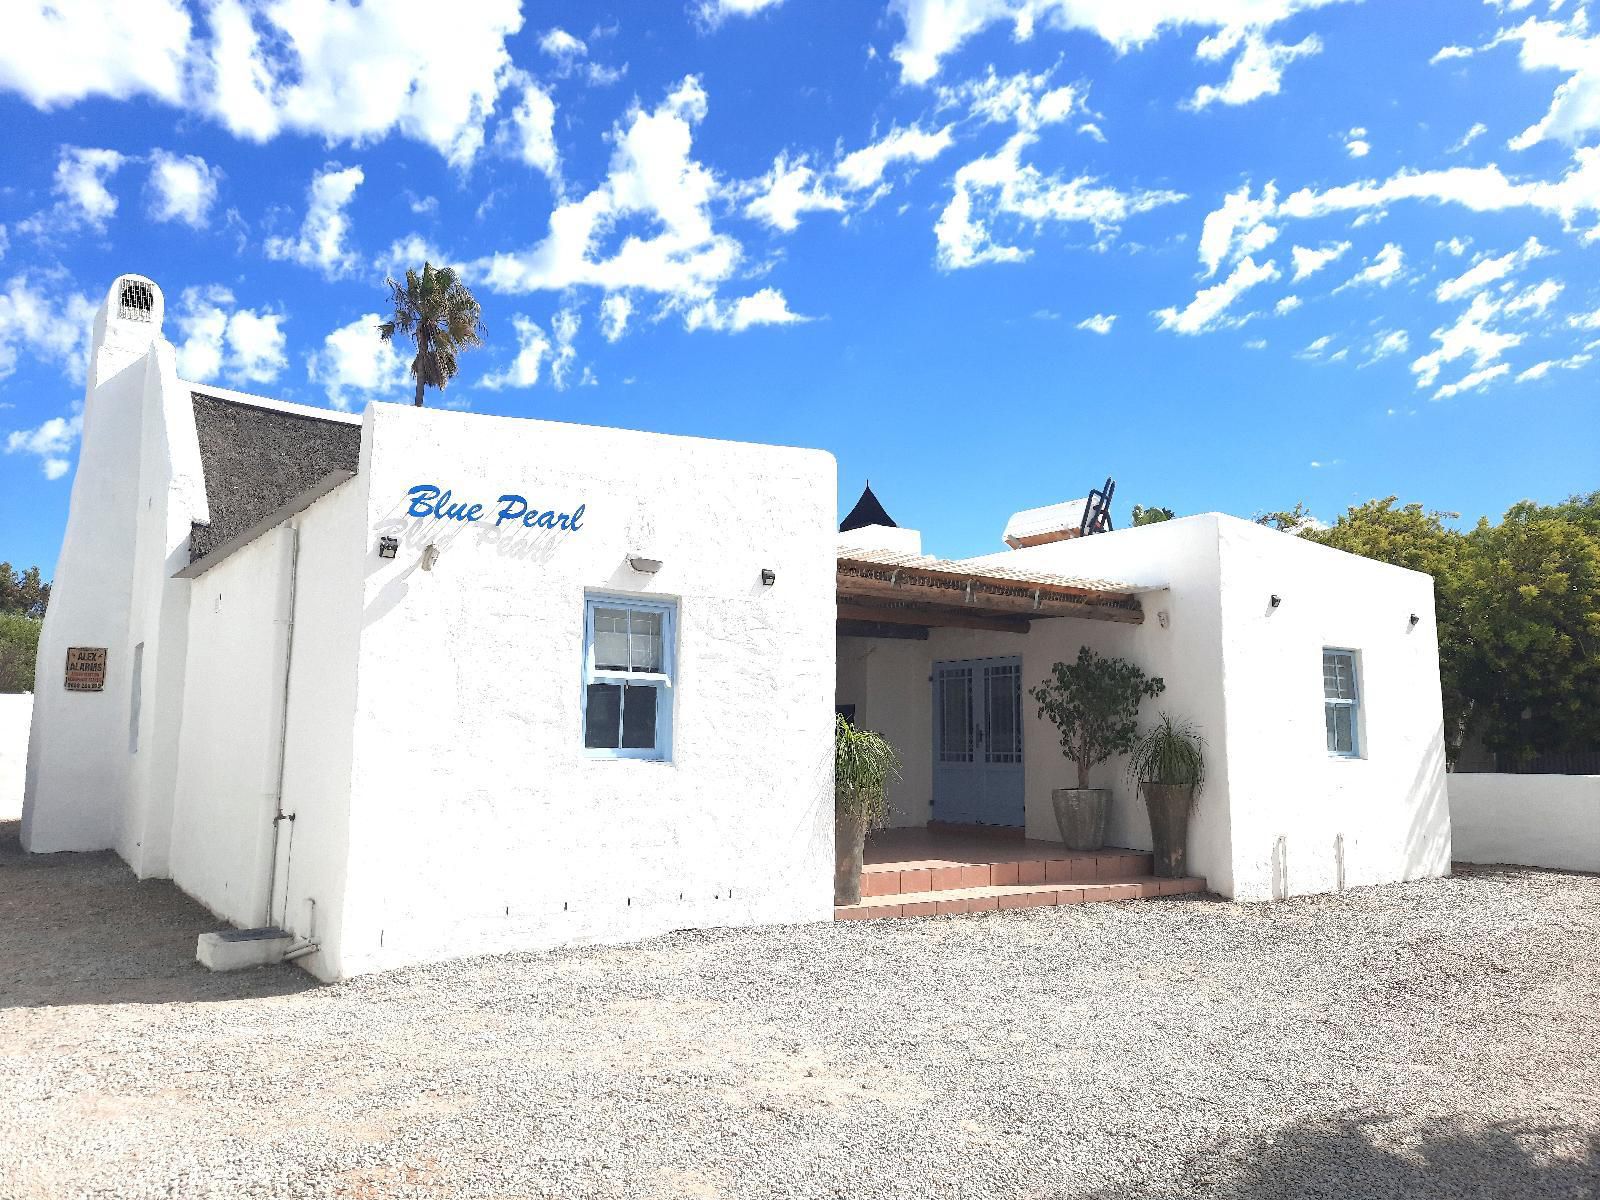 Blue Pearl Voorstrand Paternoster Western Cape South Africa Building, Architecture, House, Palm Tree, Plant, Nature, Wood